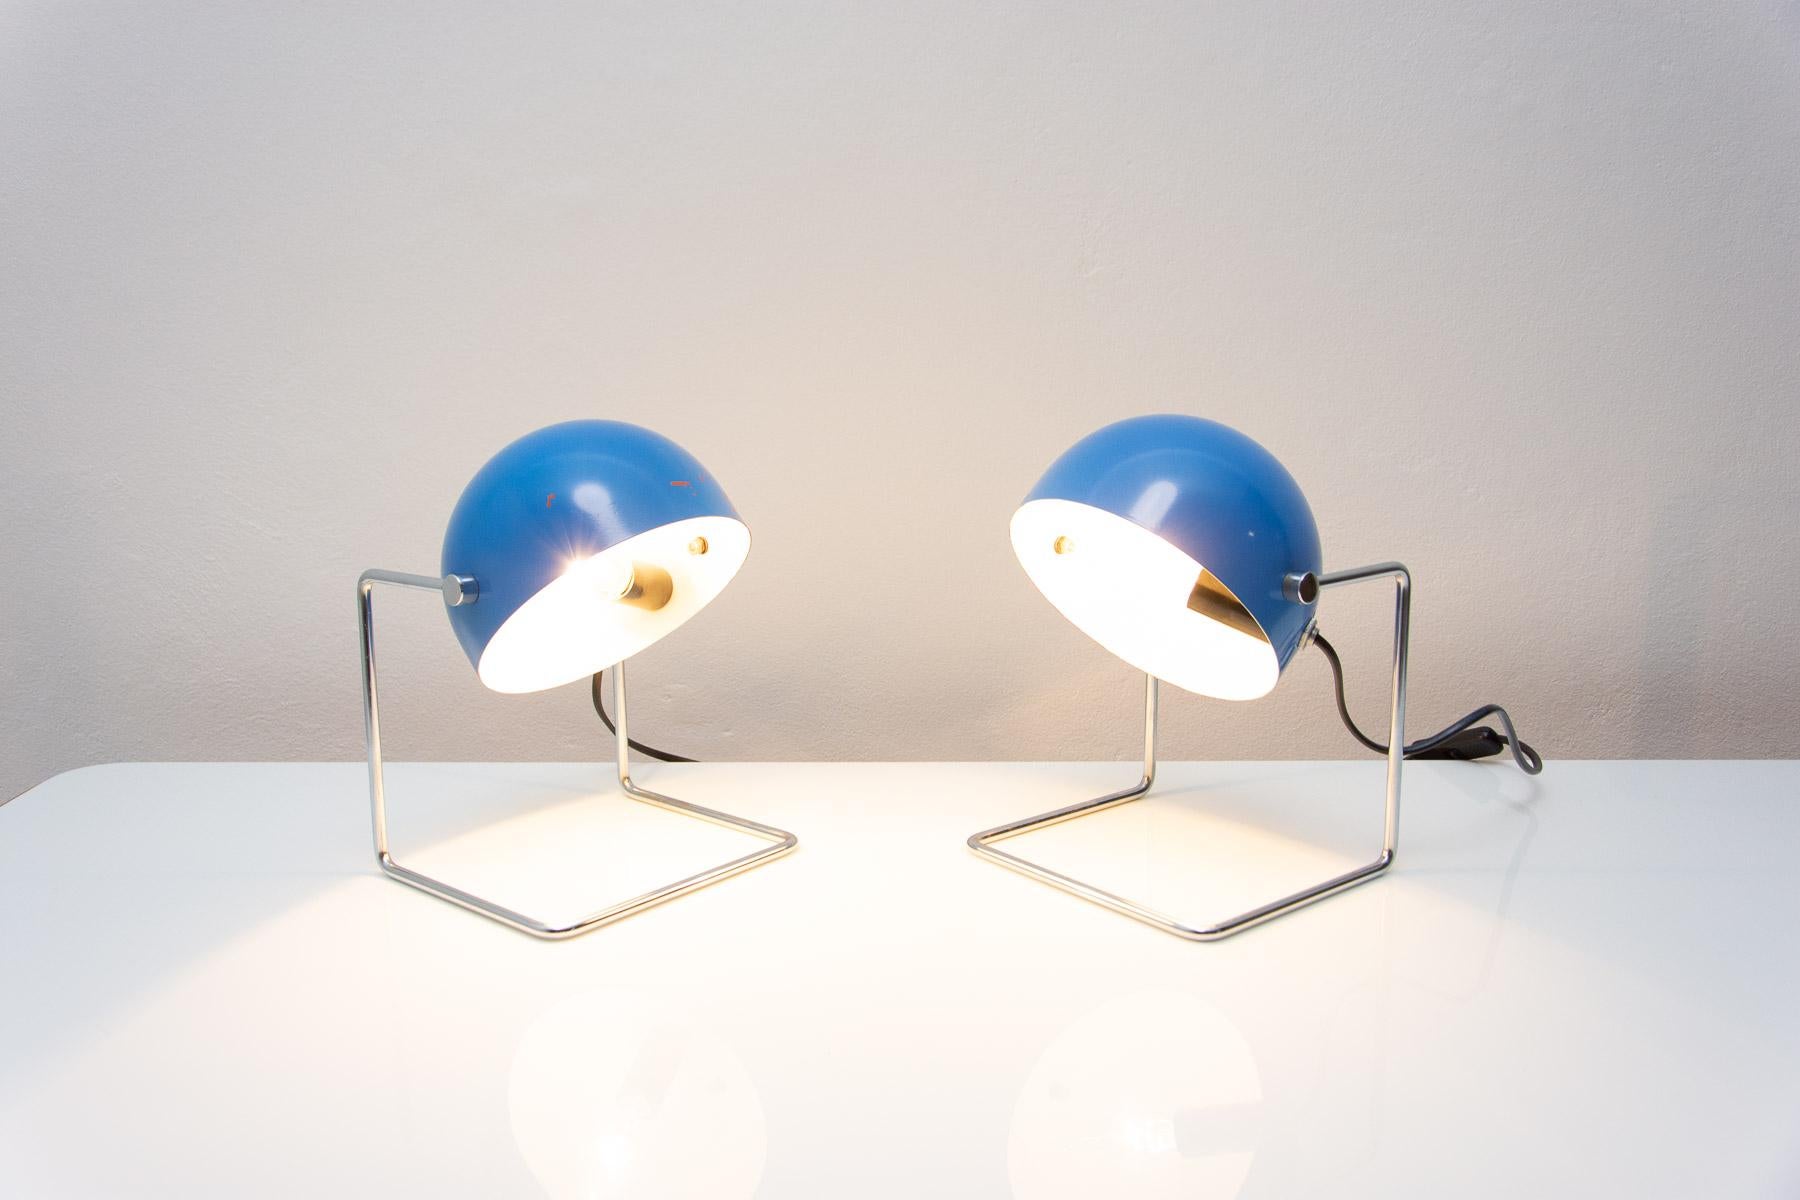  Pair of Midcentury Space-Age Positioning Desk Lamps, 1960s 8